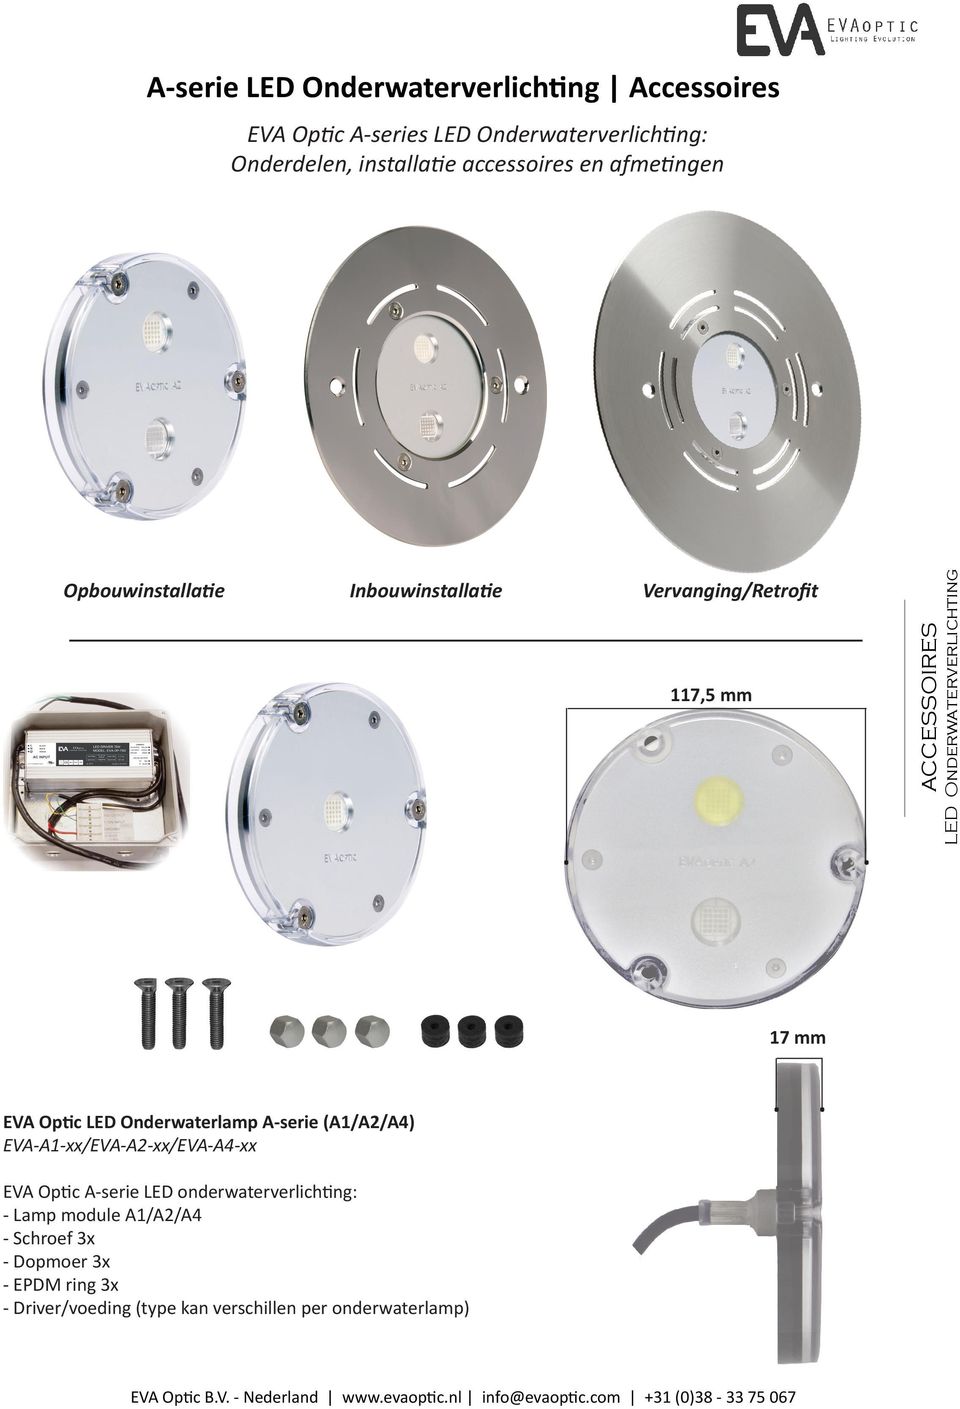 A-serie (A1/A2/A4) EVA-A1-xx/EVA-A2-xx/EVA-A4-xx EVA Optic A-serie LED onderwaterverlichting: - Lamp